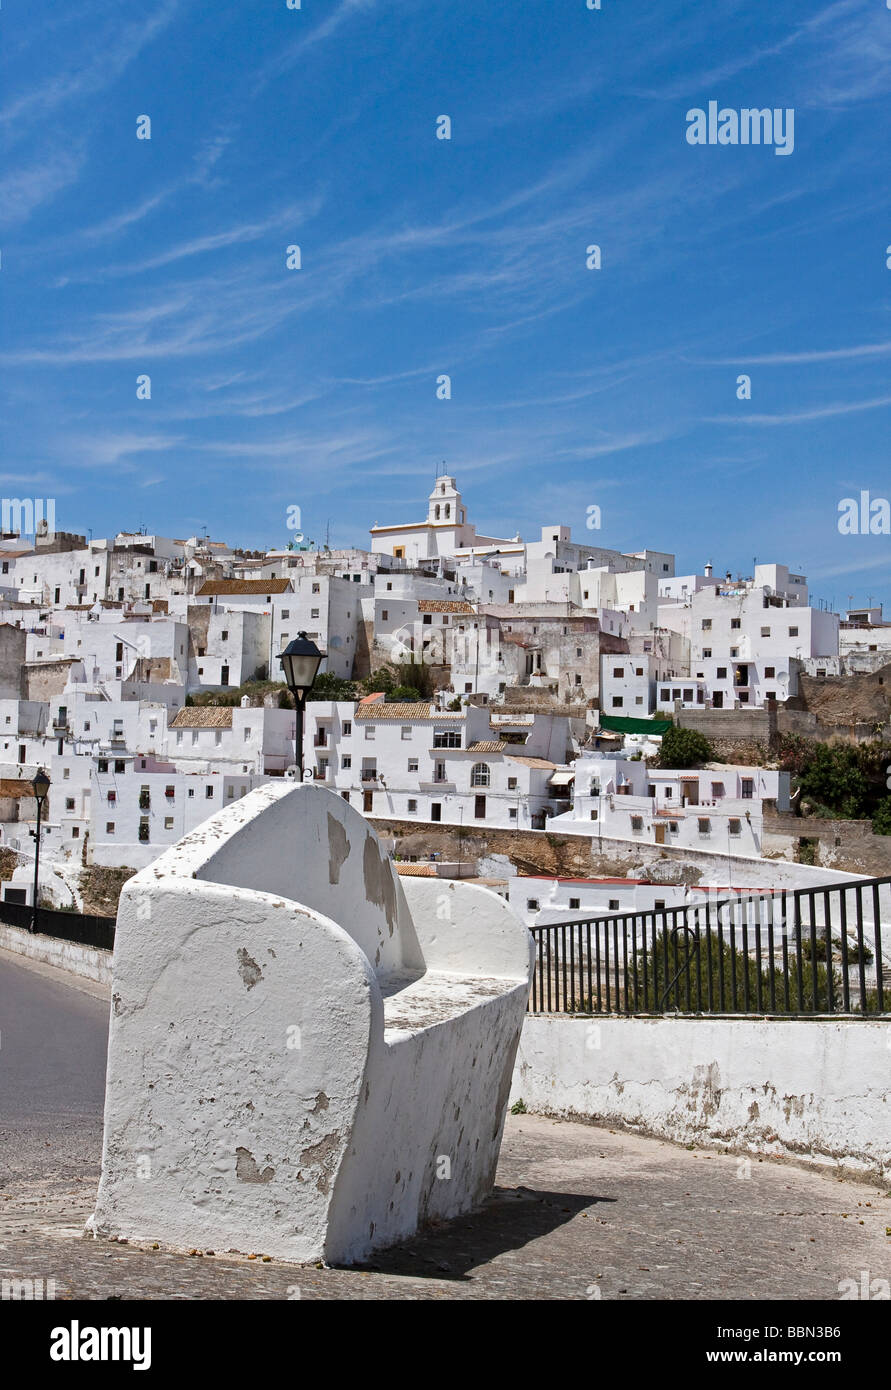 View of a part of the Old Town in Vejer de la Frontera, Andalusia, Spain, Europe Stock Photo